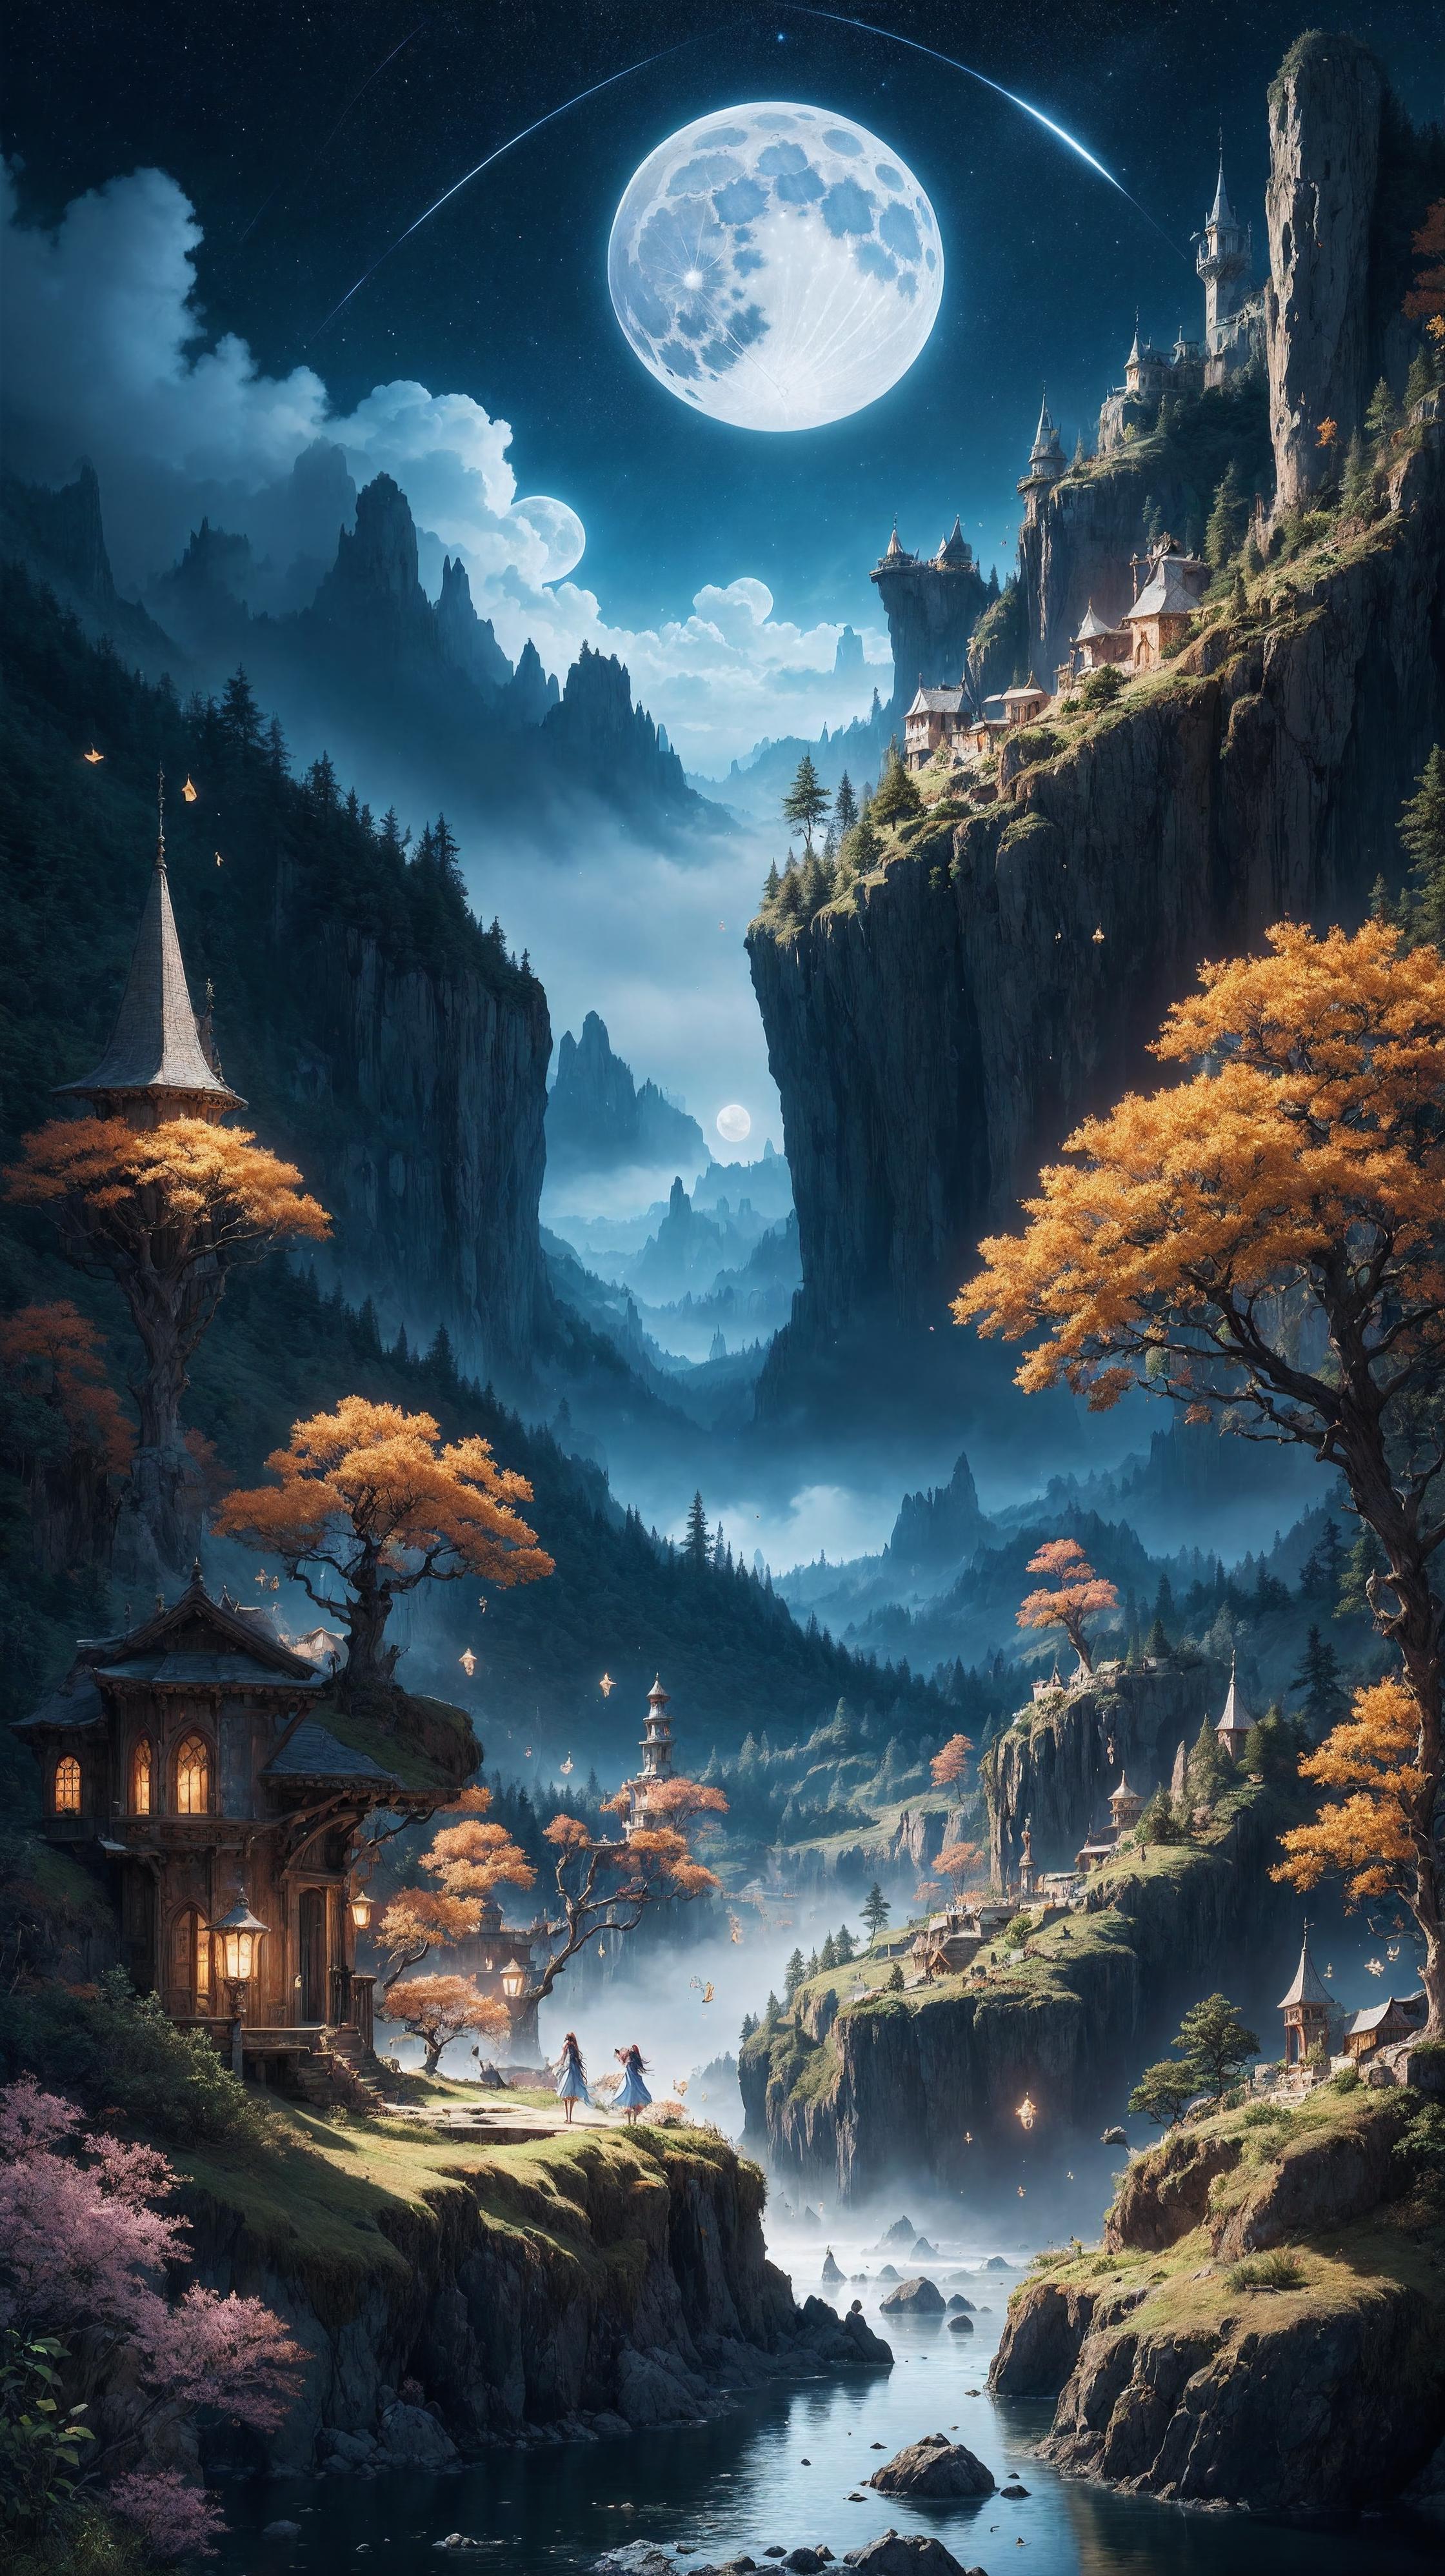 A Digital Painting of a Mountainous Landscape with a village of Houses and Trees